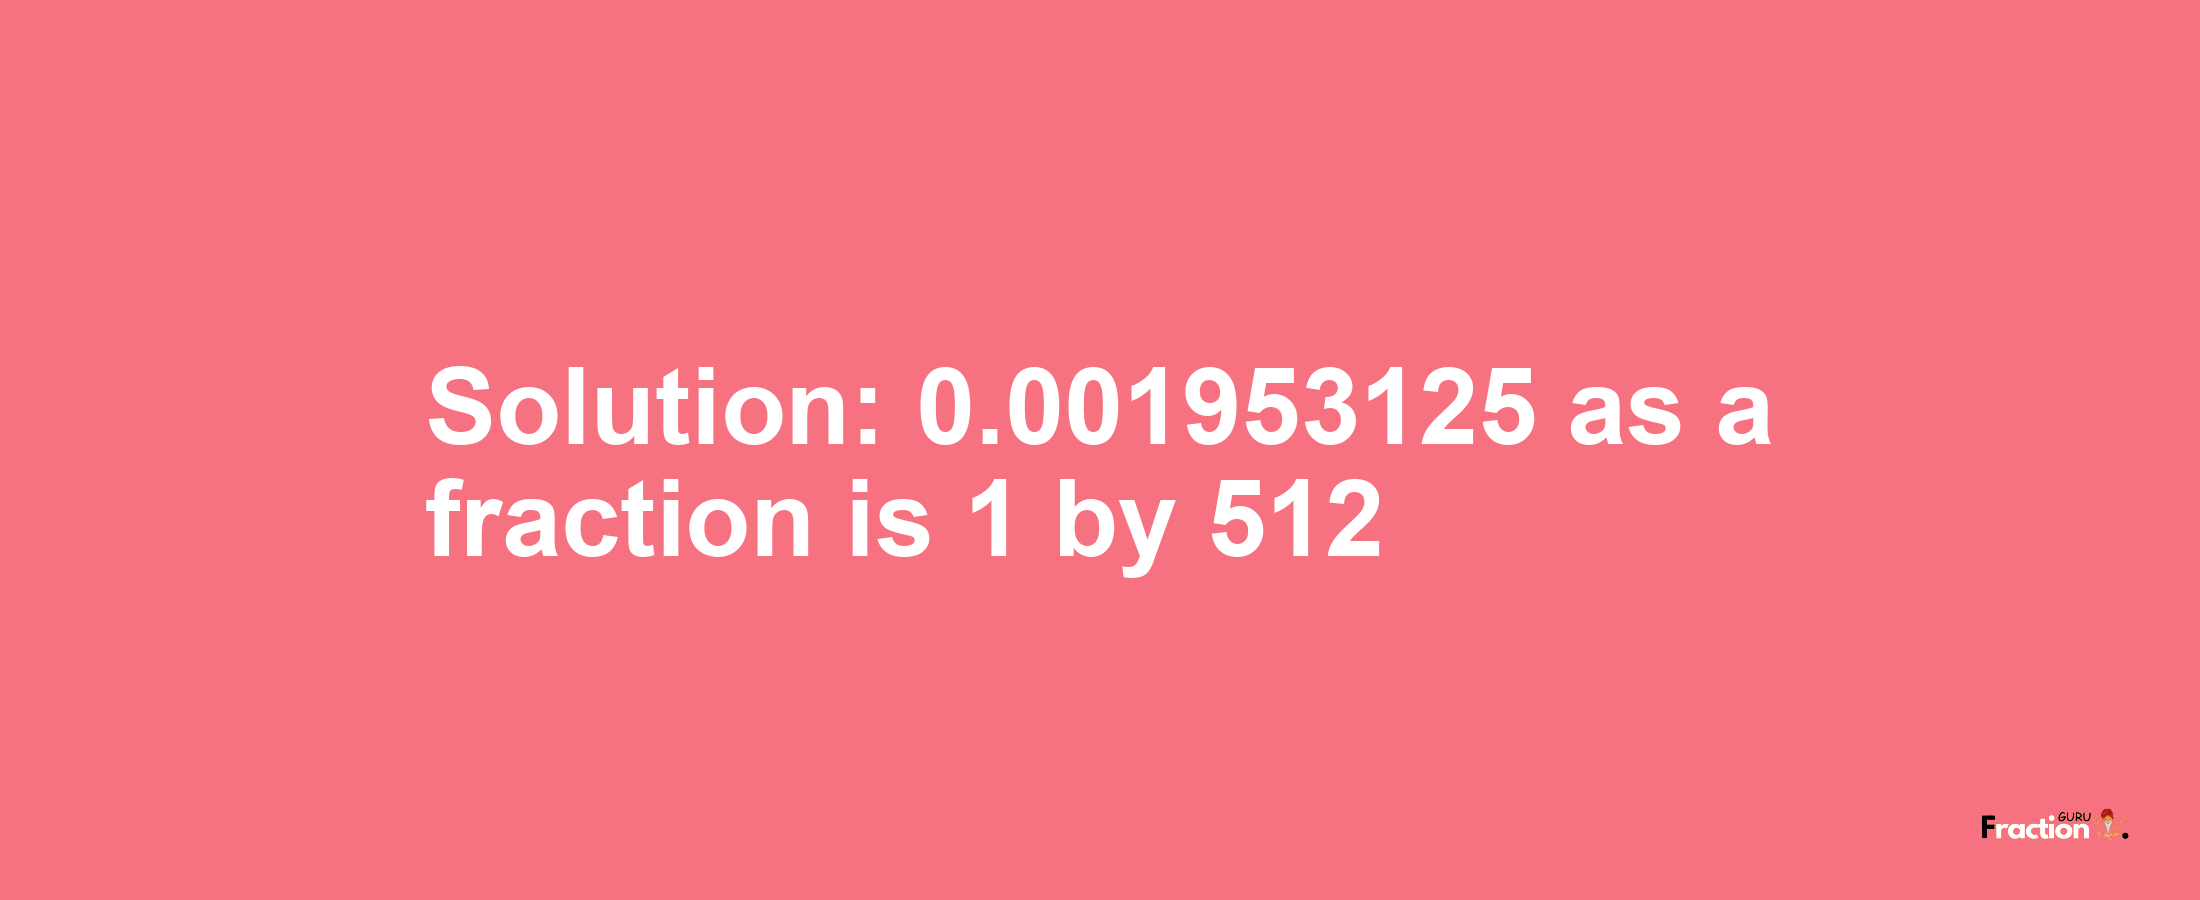 Solution:0.001953125 as a fraction is 1/512